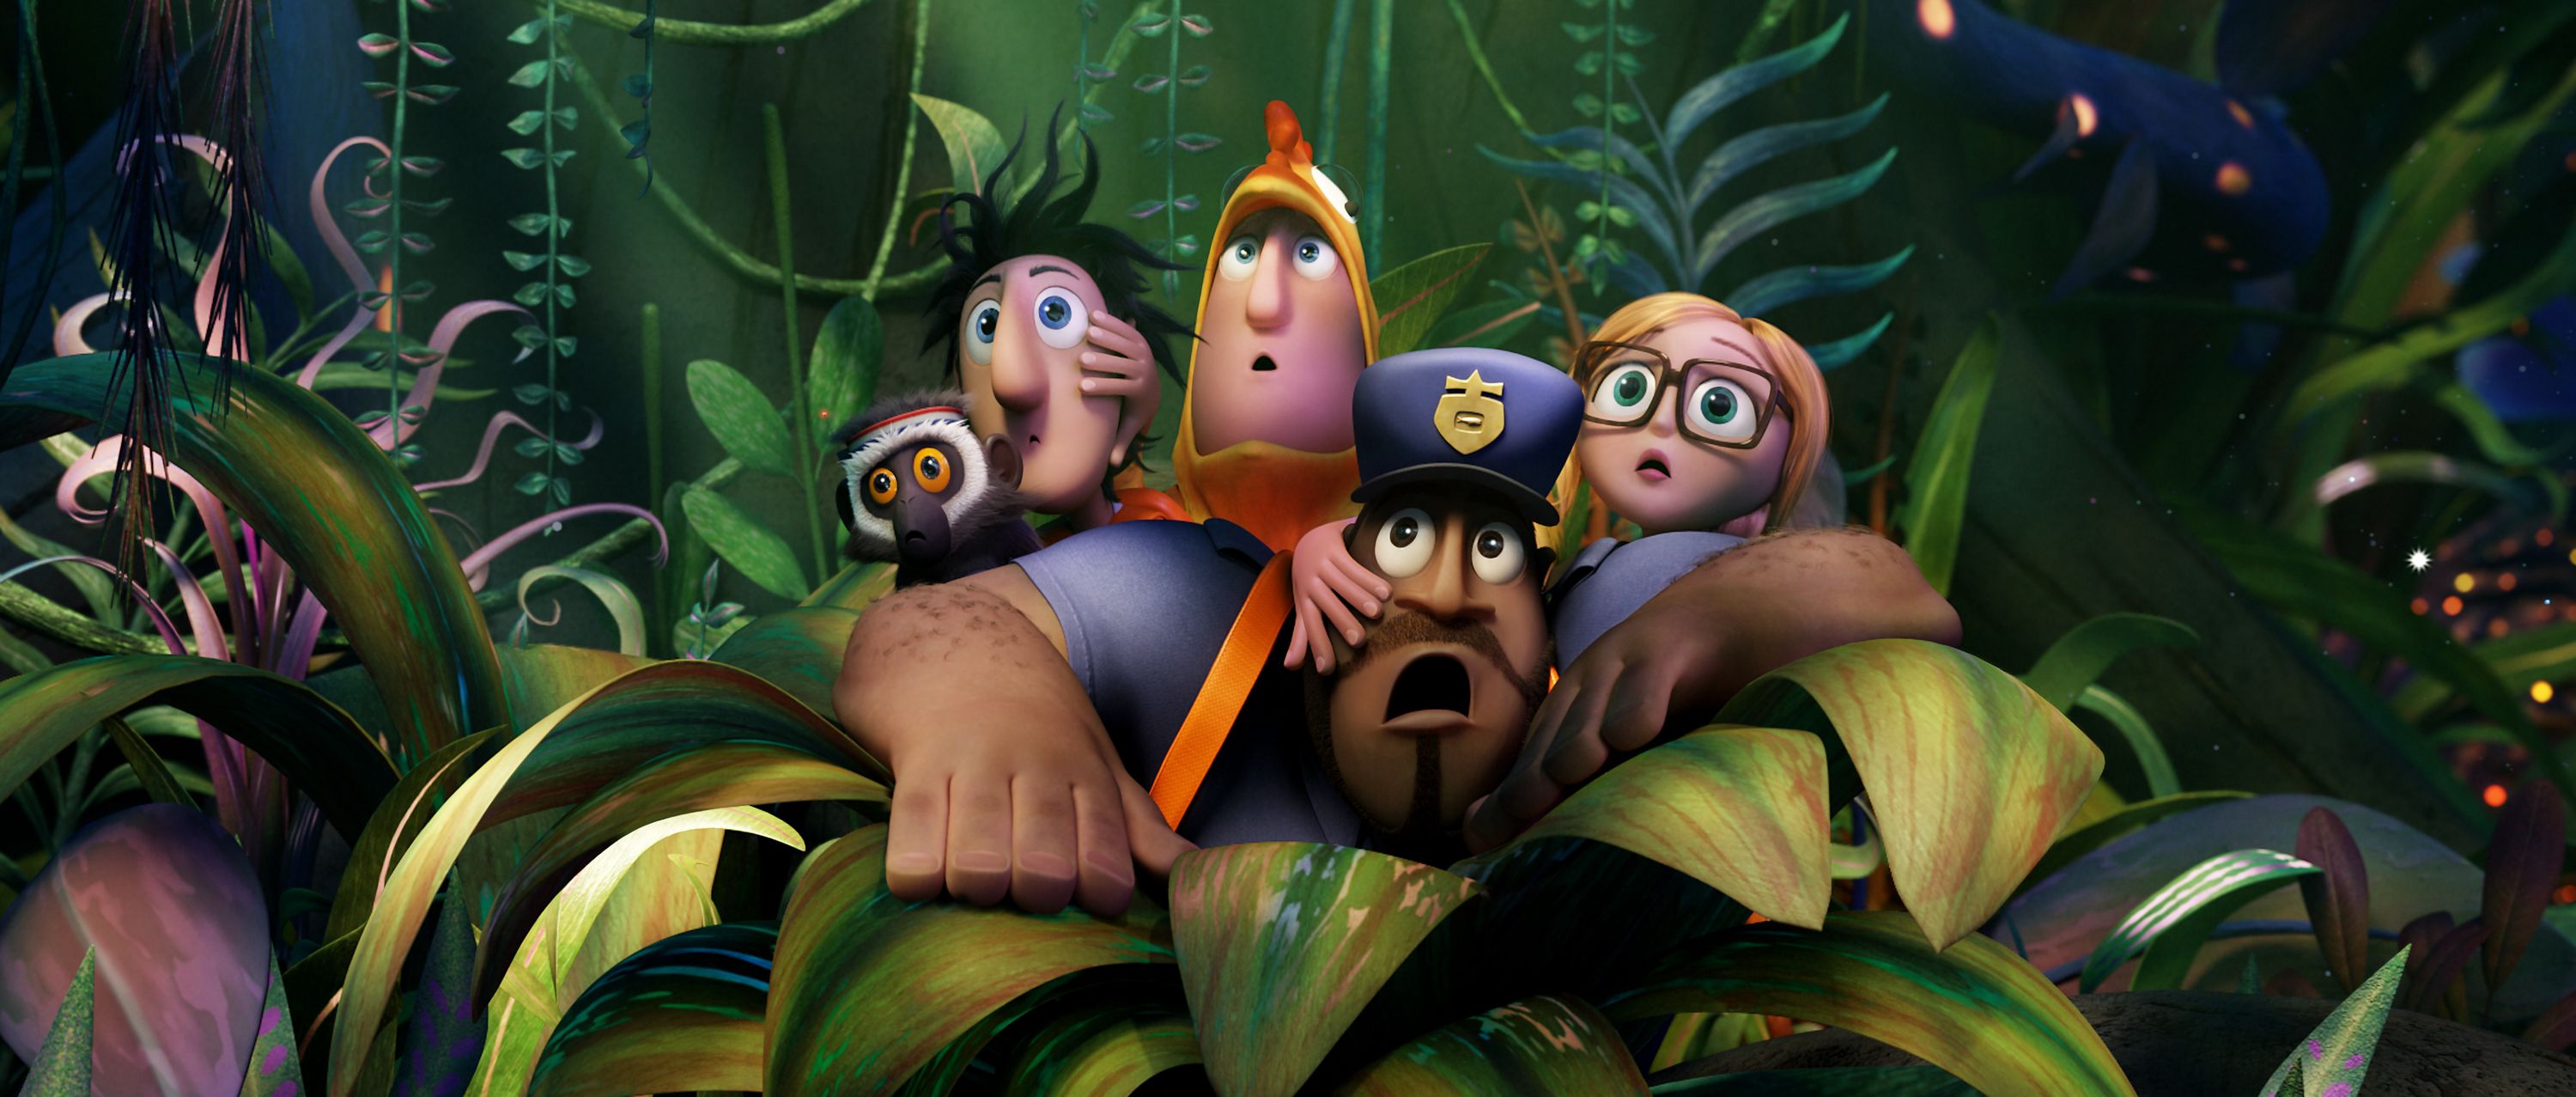 Cloudy with a Chance of Meatballs 2 Photo 3